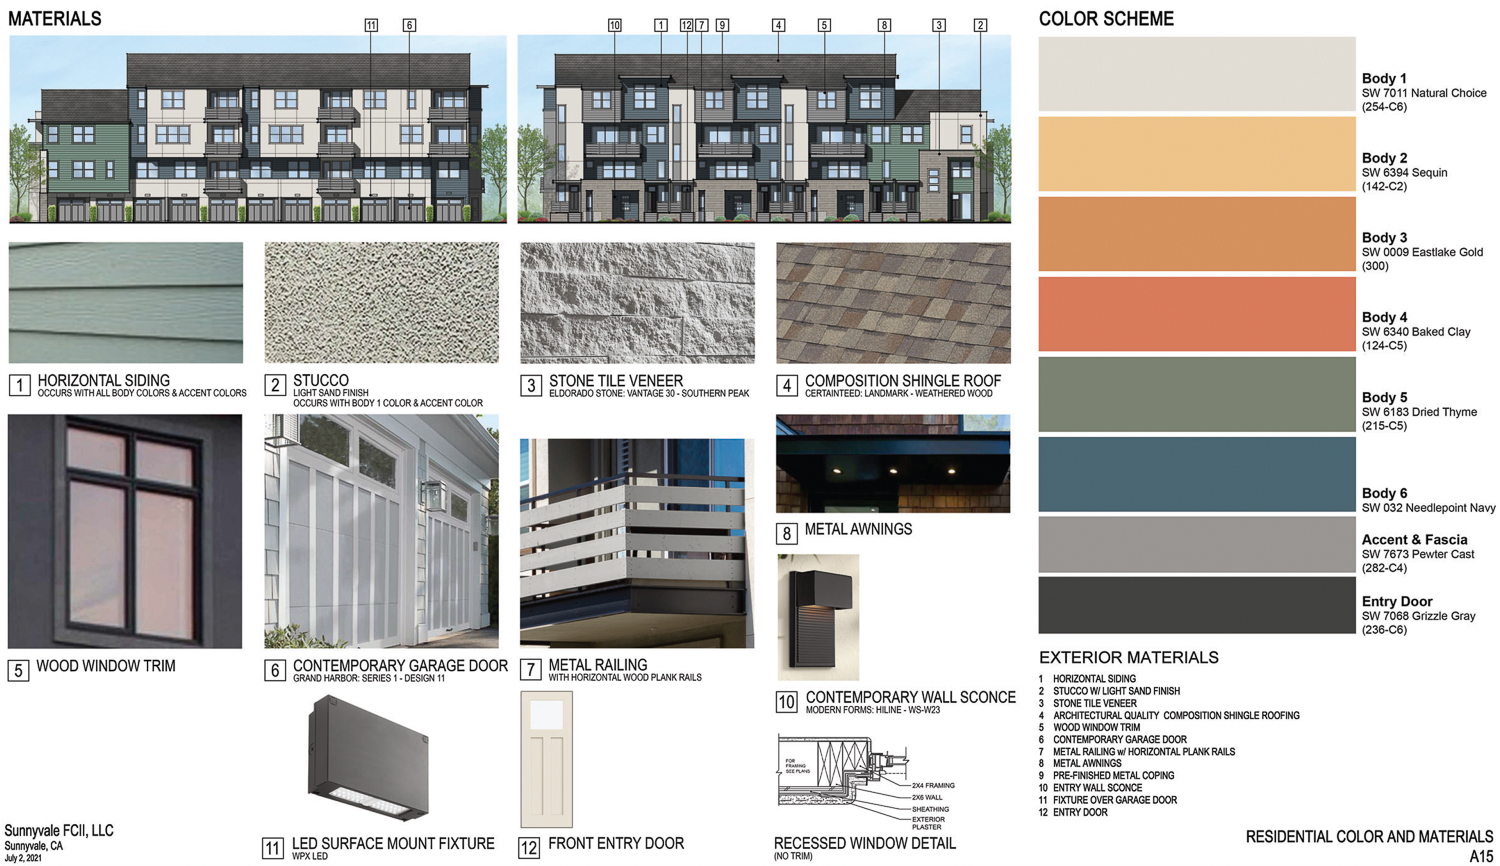 Fremont Corners Two townhomes facade design breakdown, rendering by SDG Architects